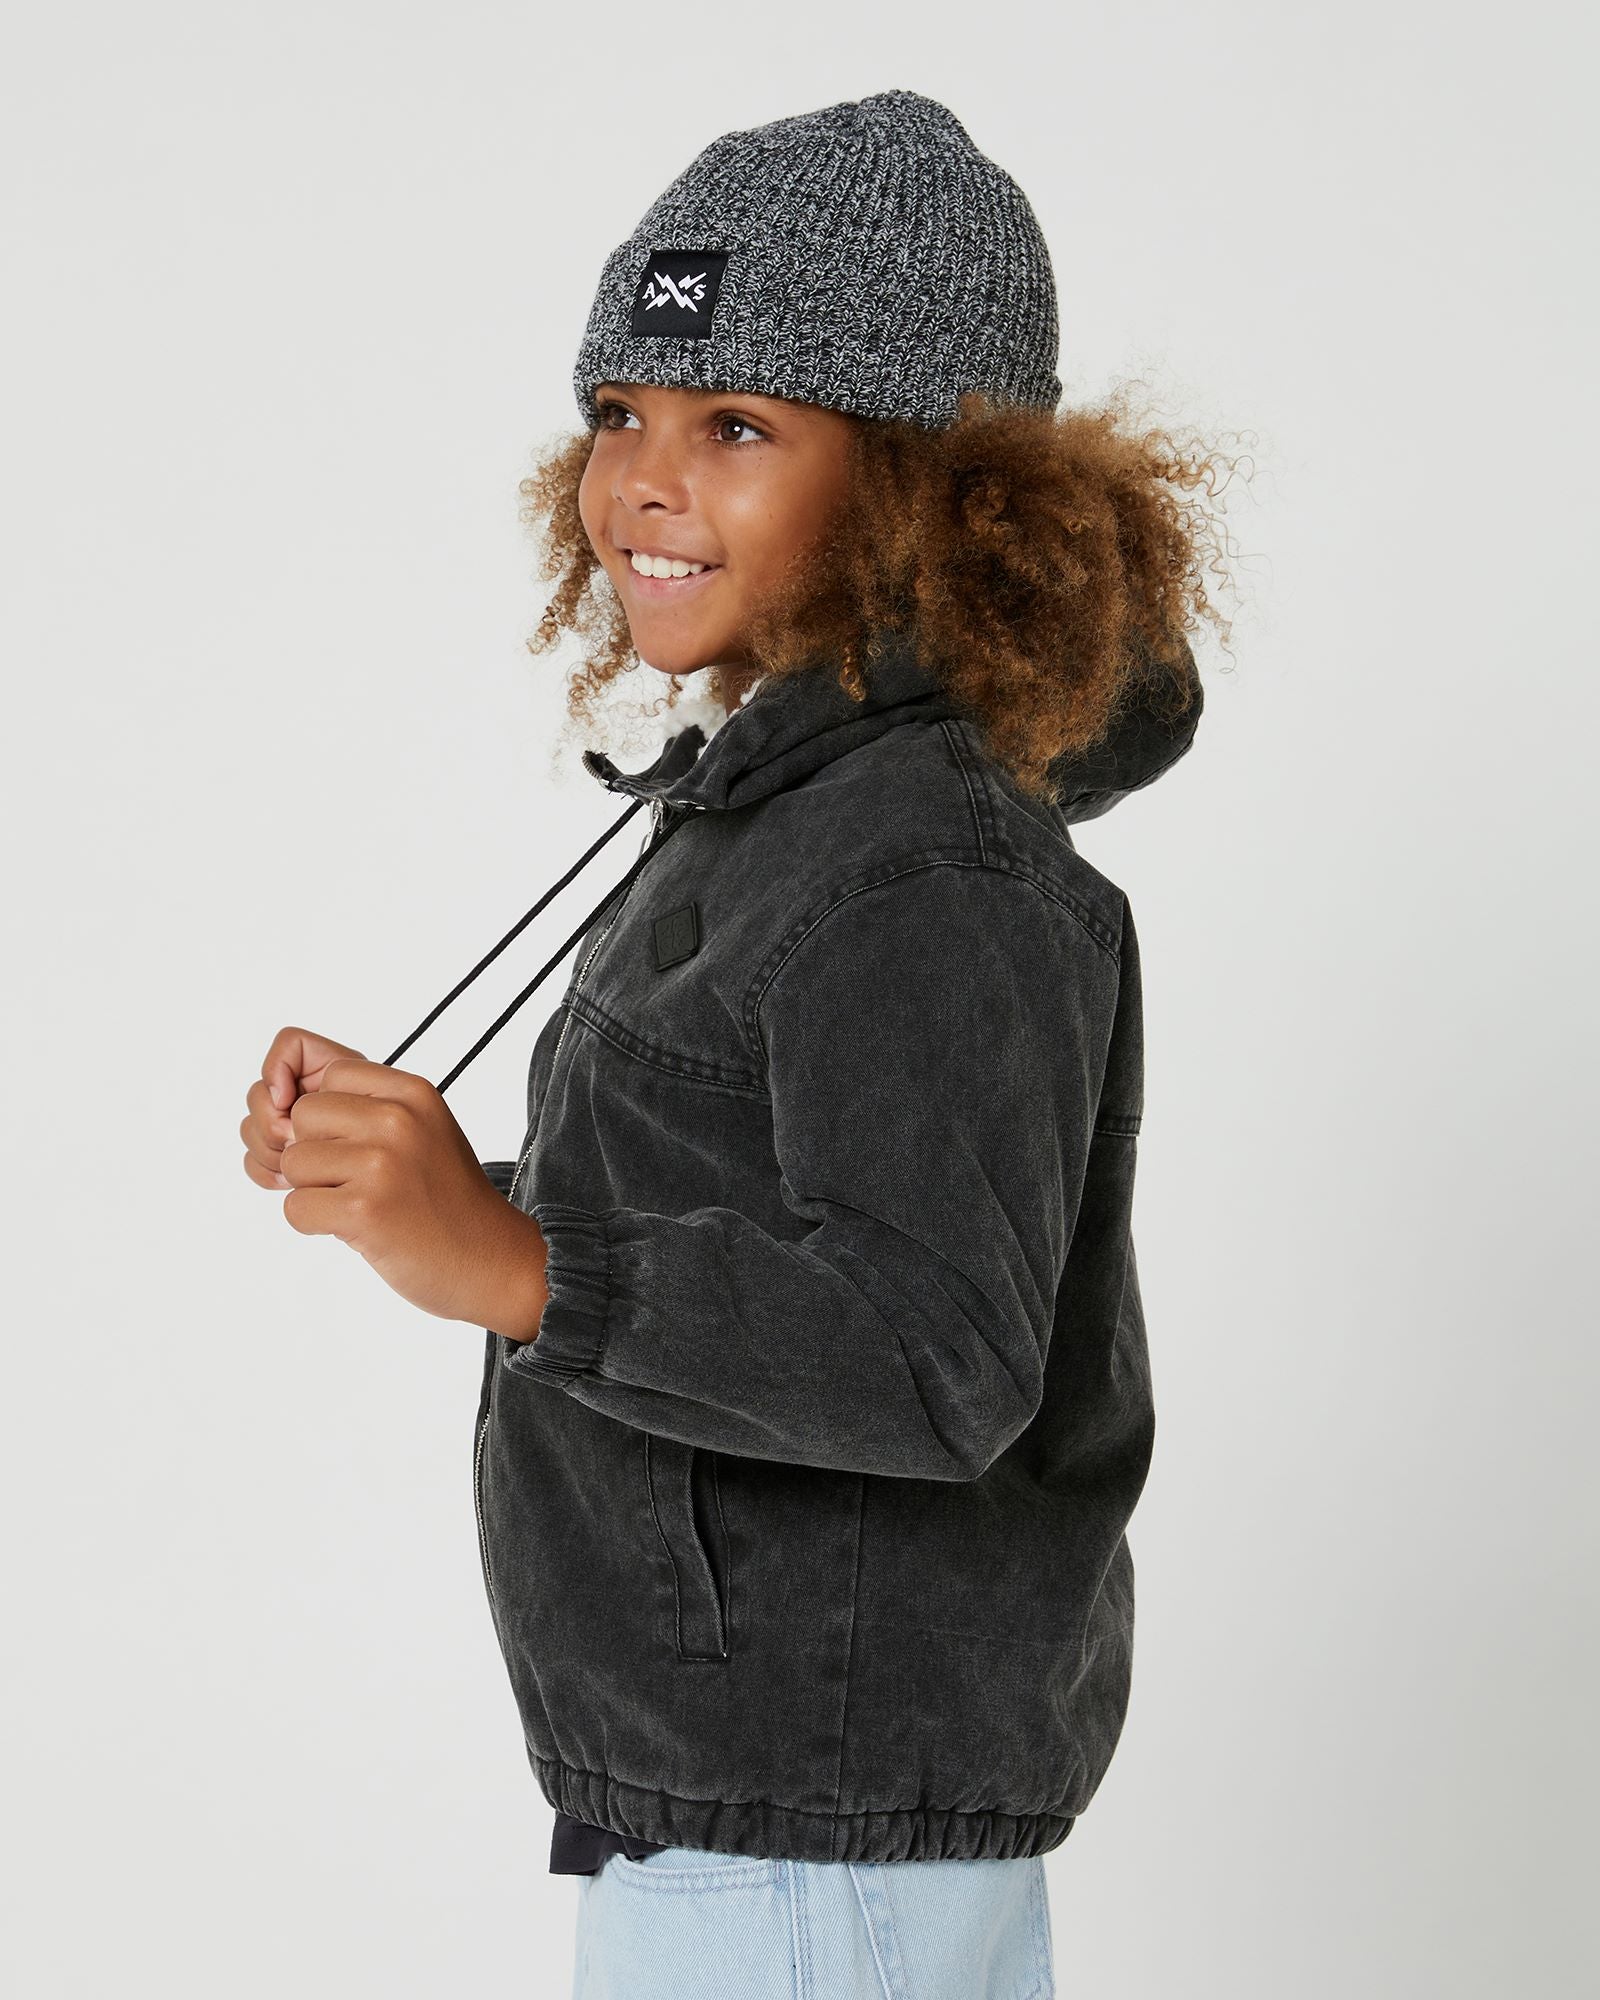 Box Beanie by Alphabet Soup - comfortable rib knit with folded cuff and trendy grey marle colorway. Features woven logo patch and fits most sizes, perfect for outdoor activities.